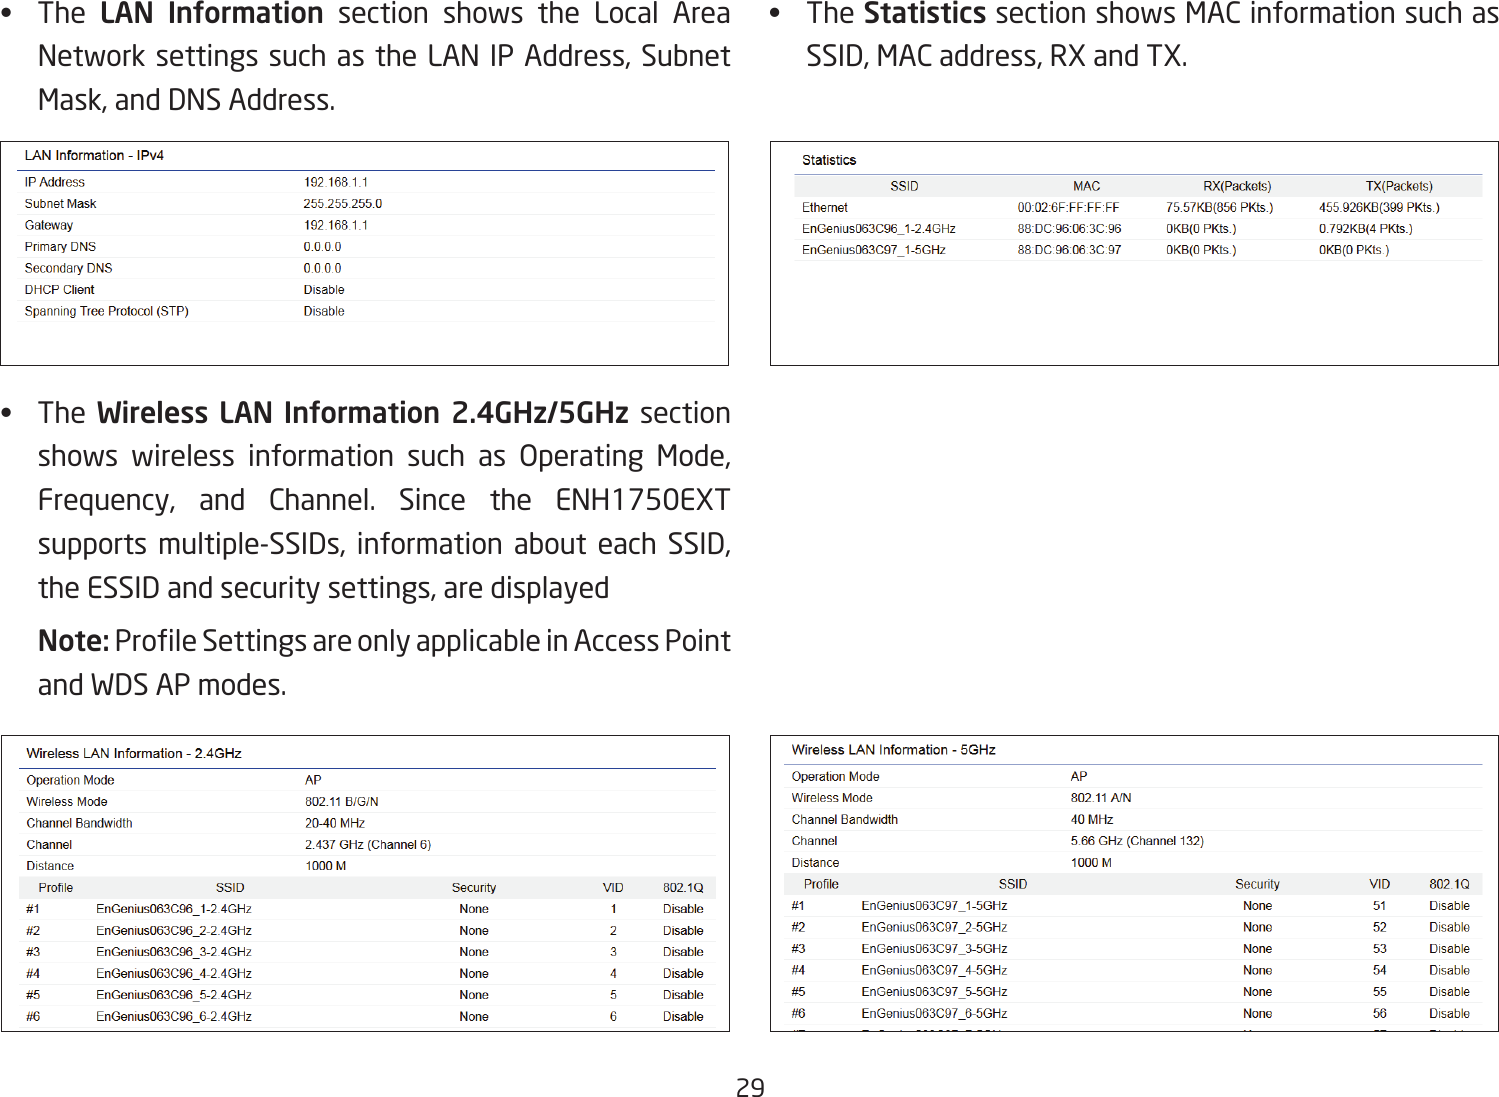 29•  The  LAN  Information section shows the Local Area Network settings such as the LAN IP Address, Subnet Mask, and DNS Address.•  The Wireless  LAN  Information  2.4GHz/5GHz section shows wireless information such as Operating Mode,Frequency, and Channel. Since the ENH1750EXT supports multiple-SSIDs, information about each SSID, the ESSID and security settings, are displayed Note: ProleSettingsareonlyapplicableinAccessPointand WDS AP modes.•  TheStatistics section shows MAC information such as SSID, MAC address, RX and TX.